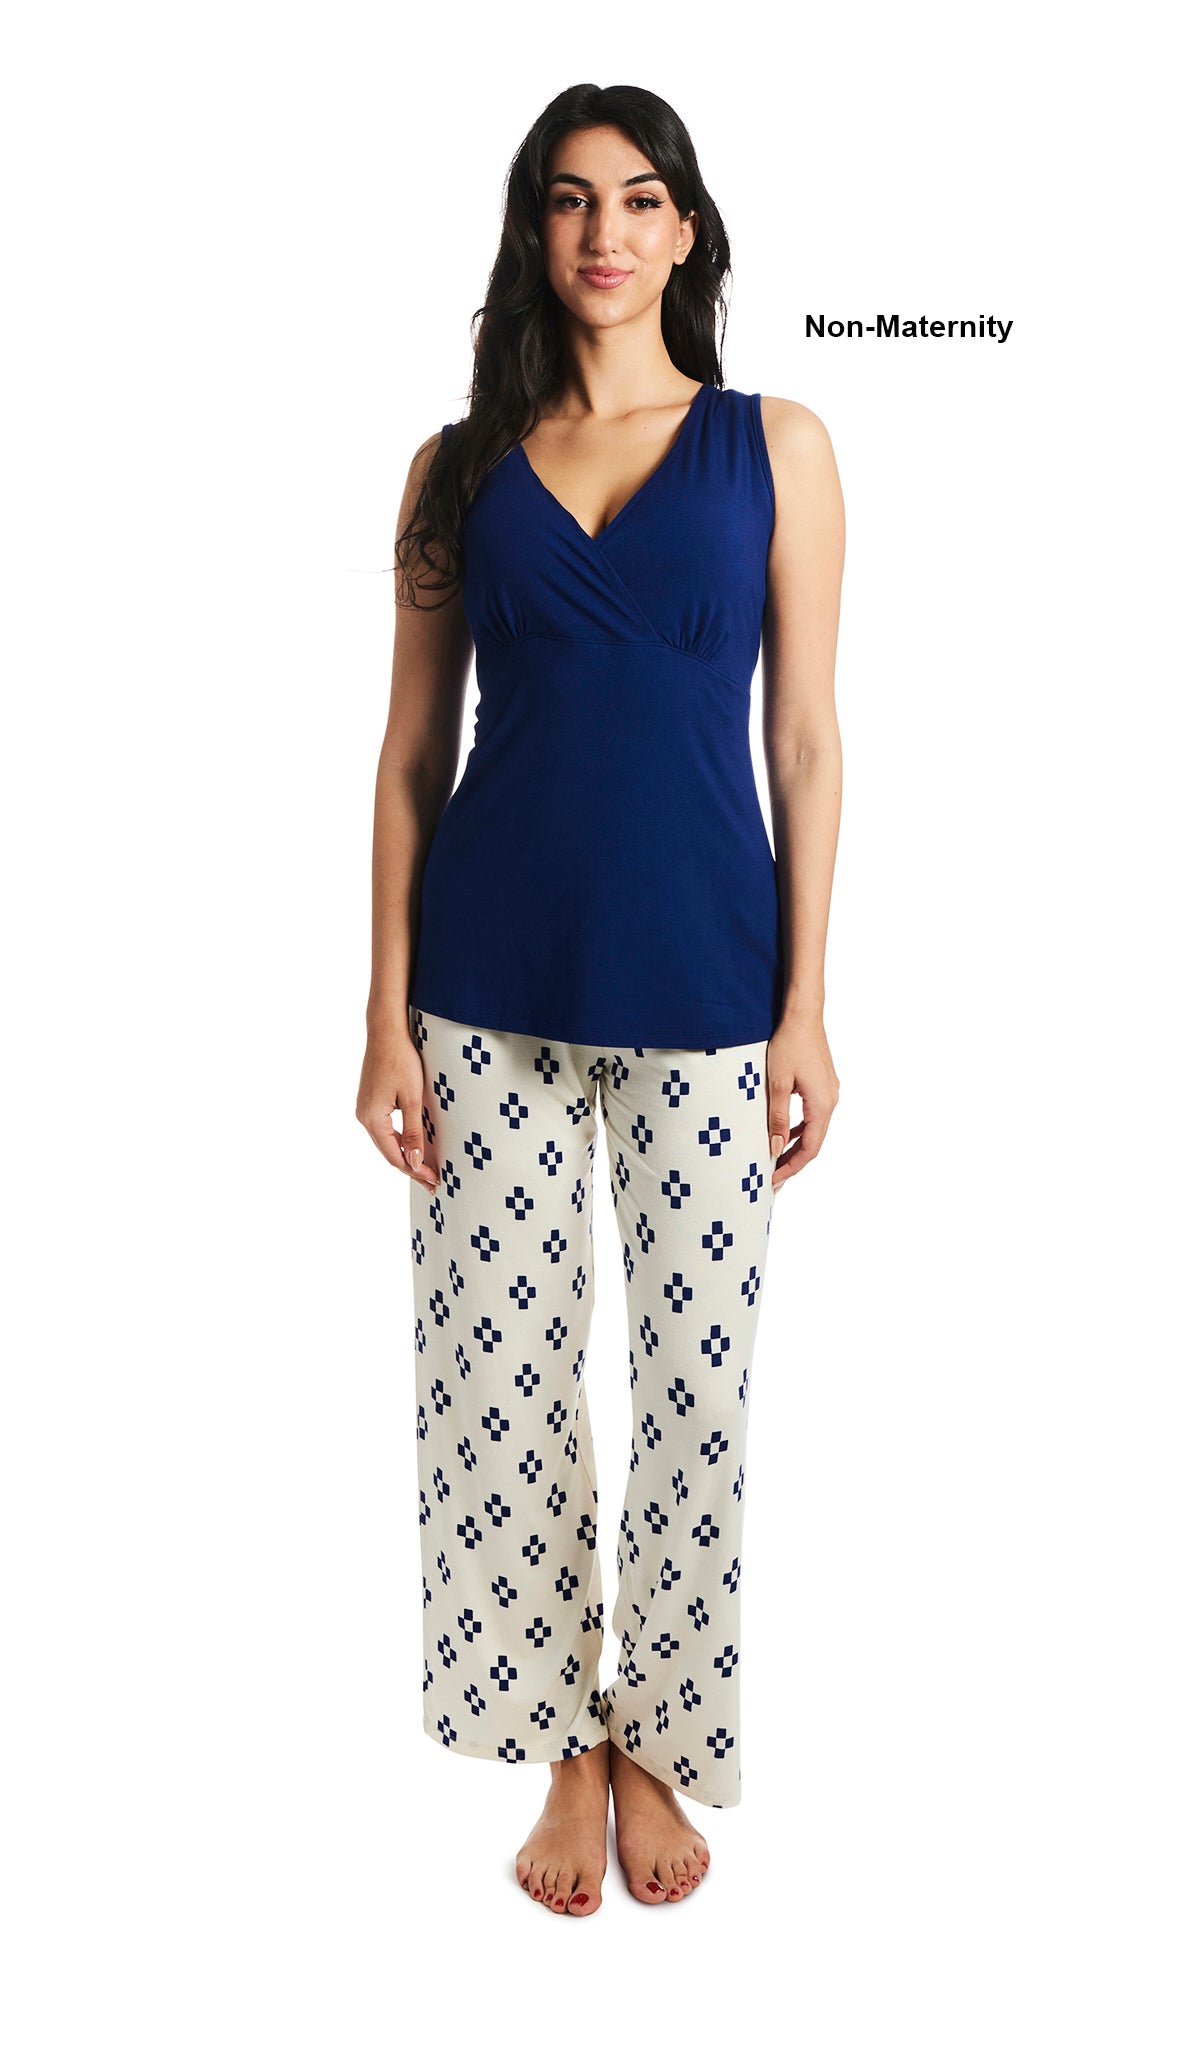 Geo Analise 5-Piece Set, pregnant woman wearing criss-cross bust tank top and pant. as non-maternity.